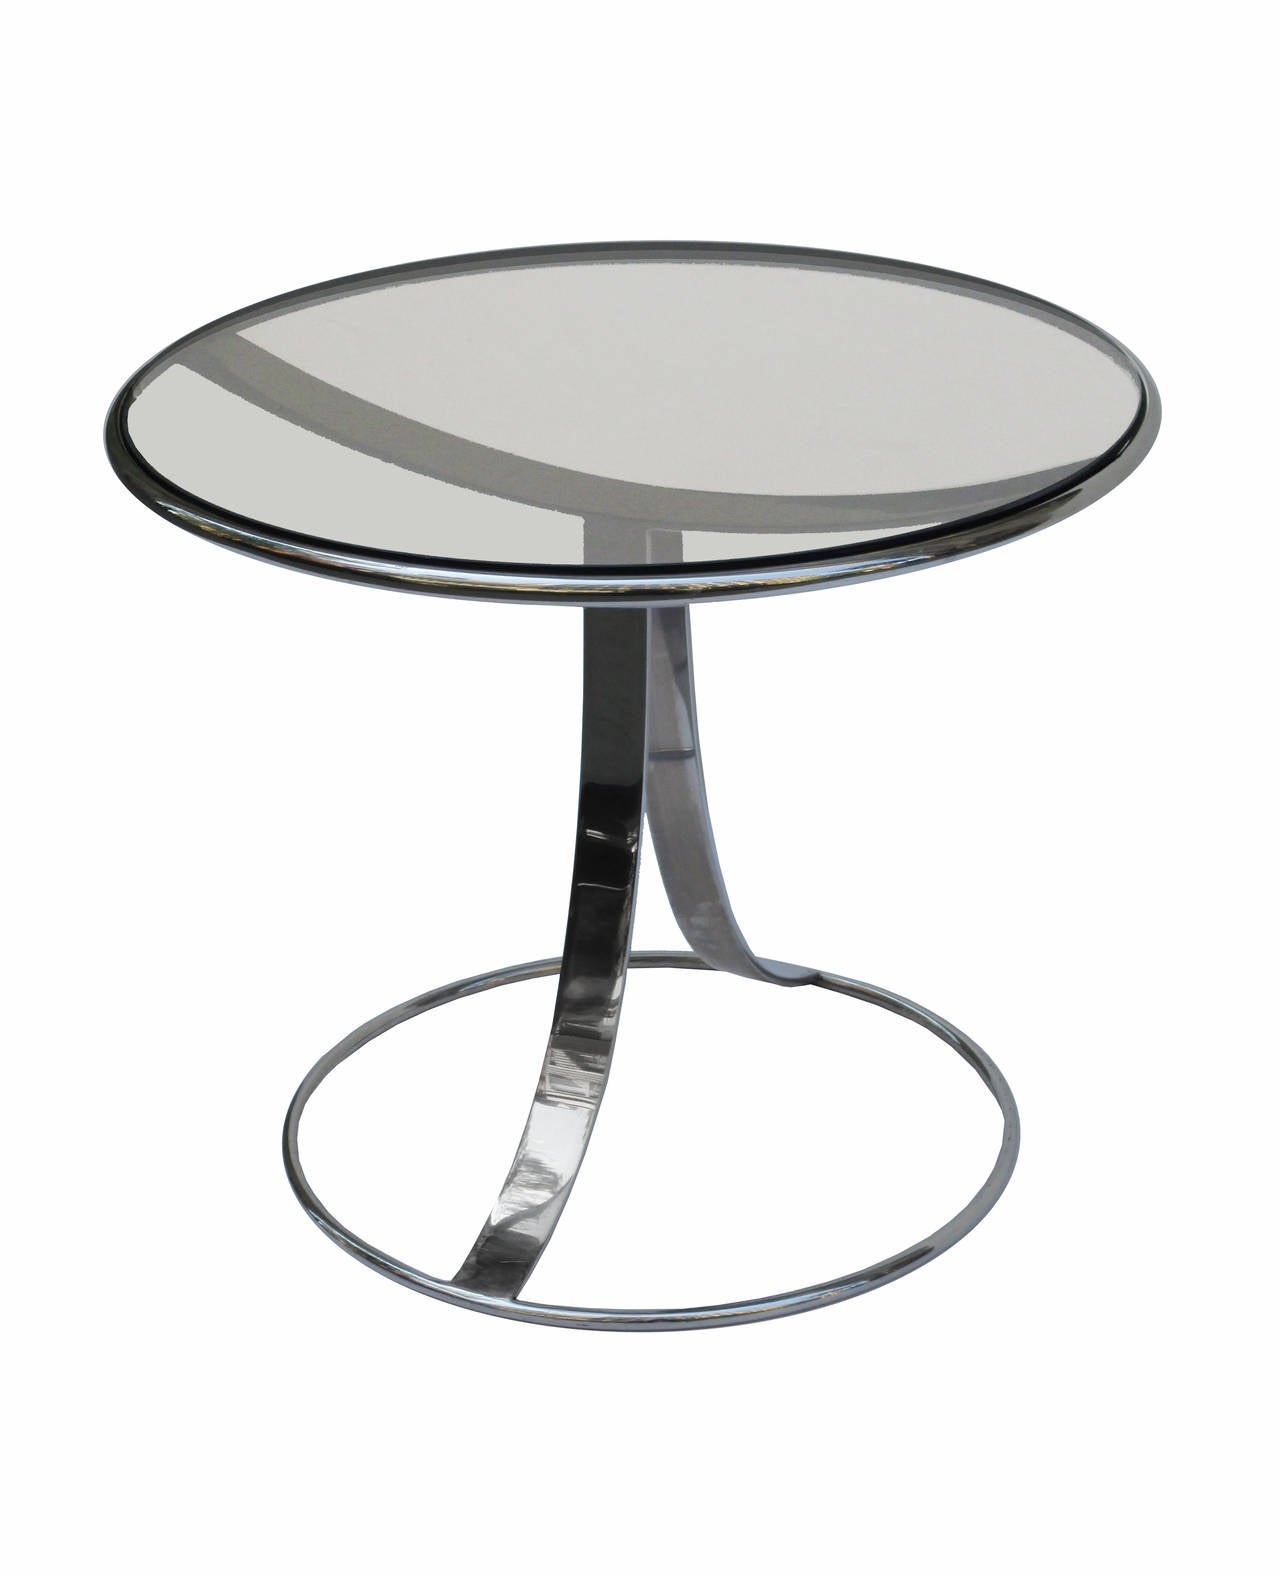 Pair of Gardner Leaver side tables for Steelcase.
Stainless Steel with original  glass tops.